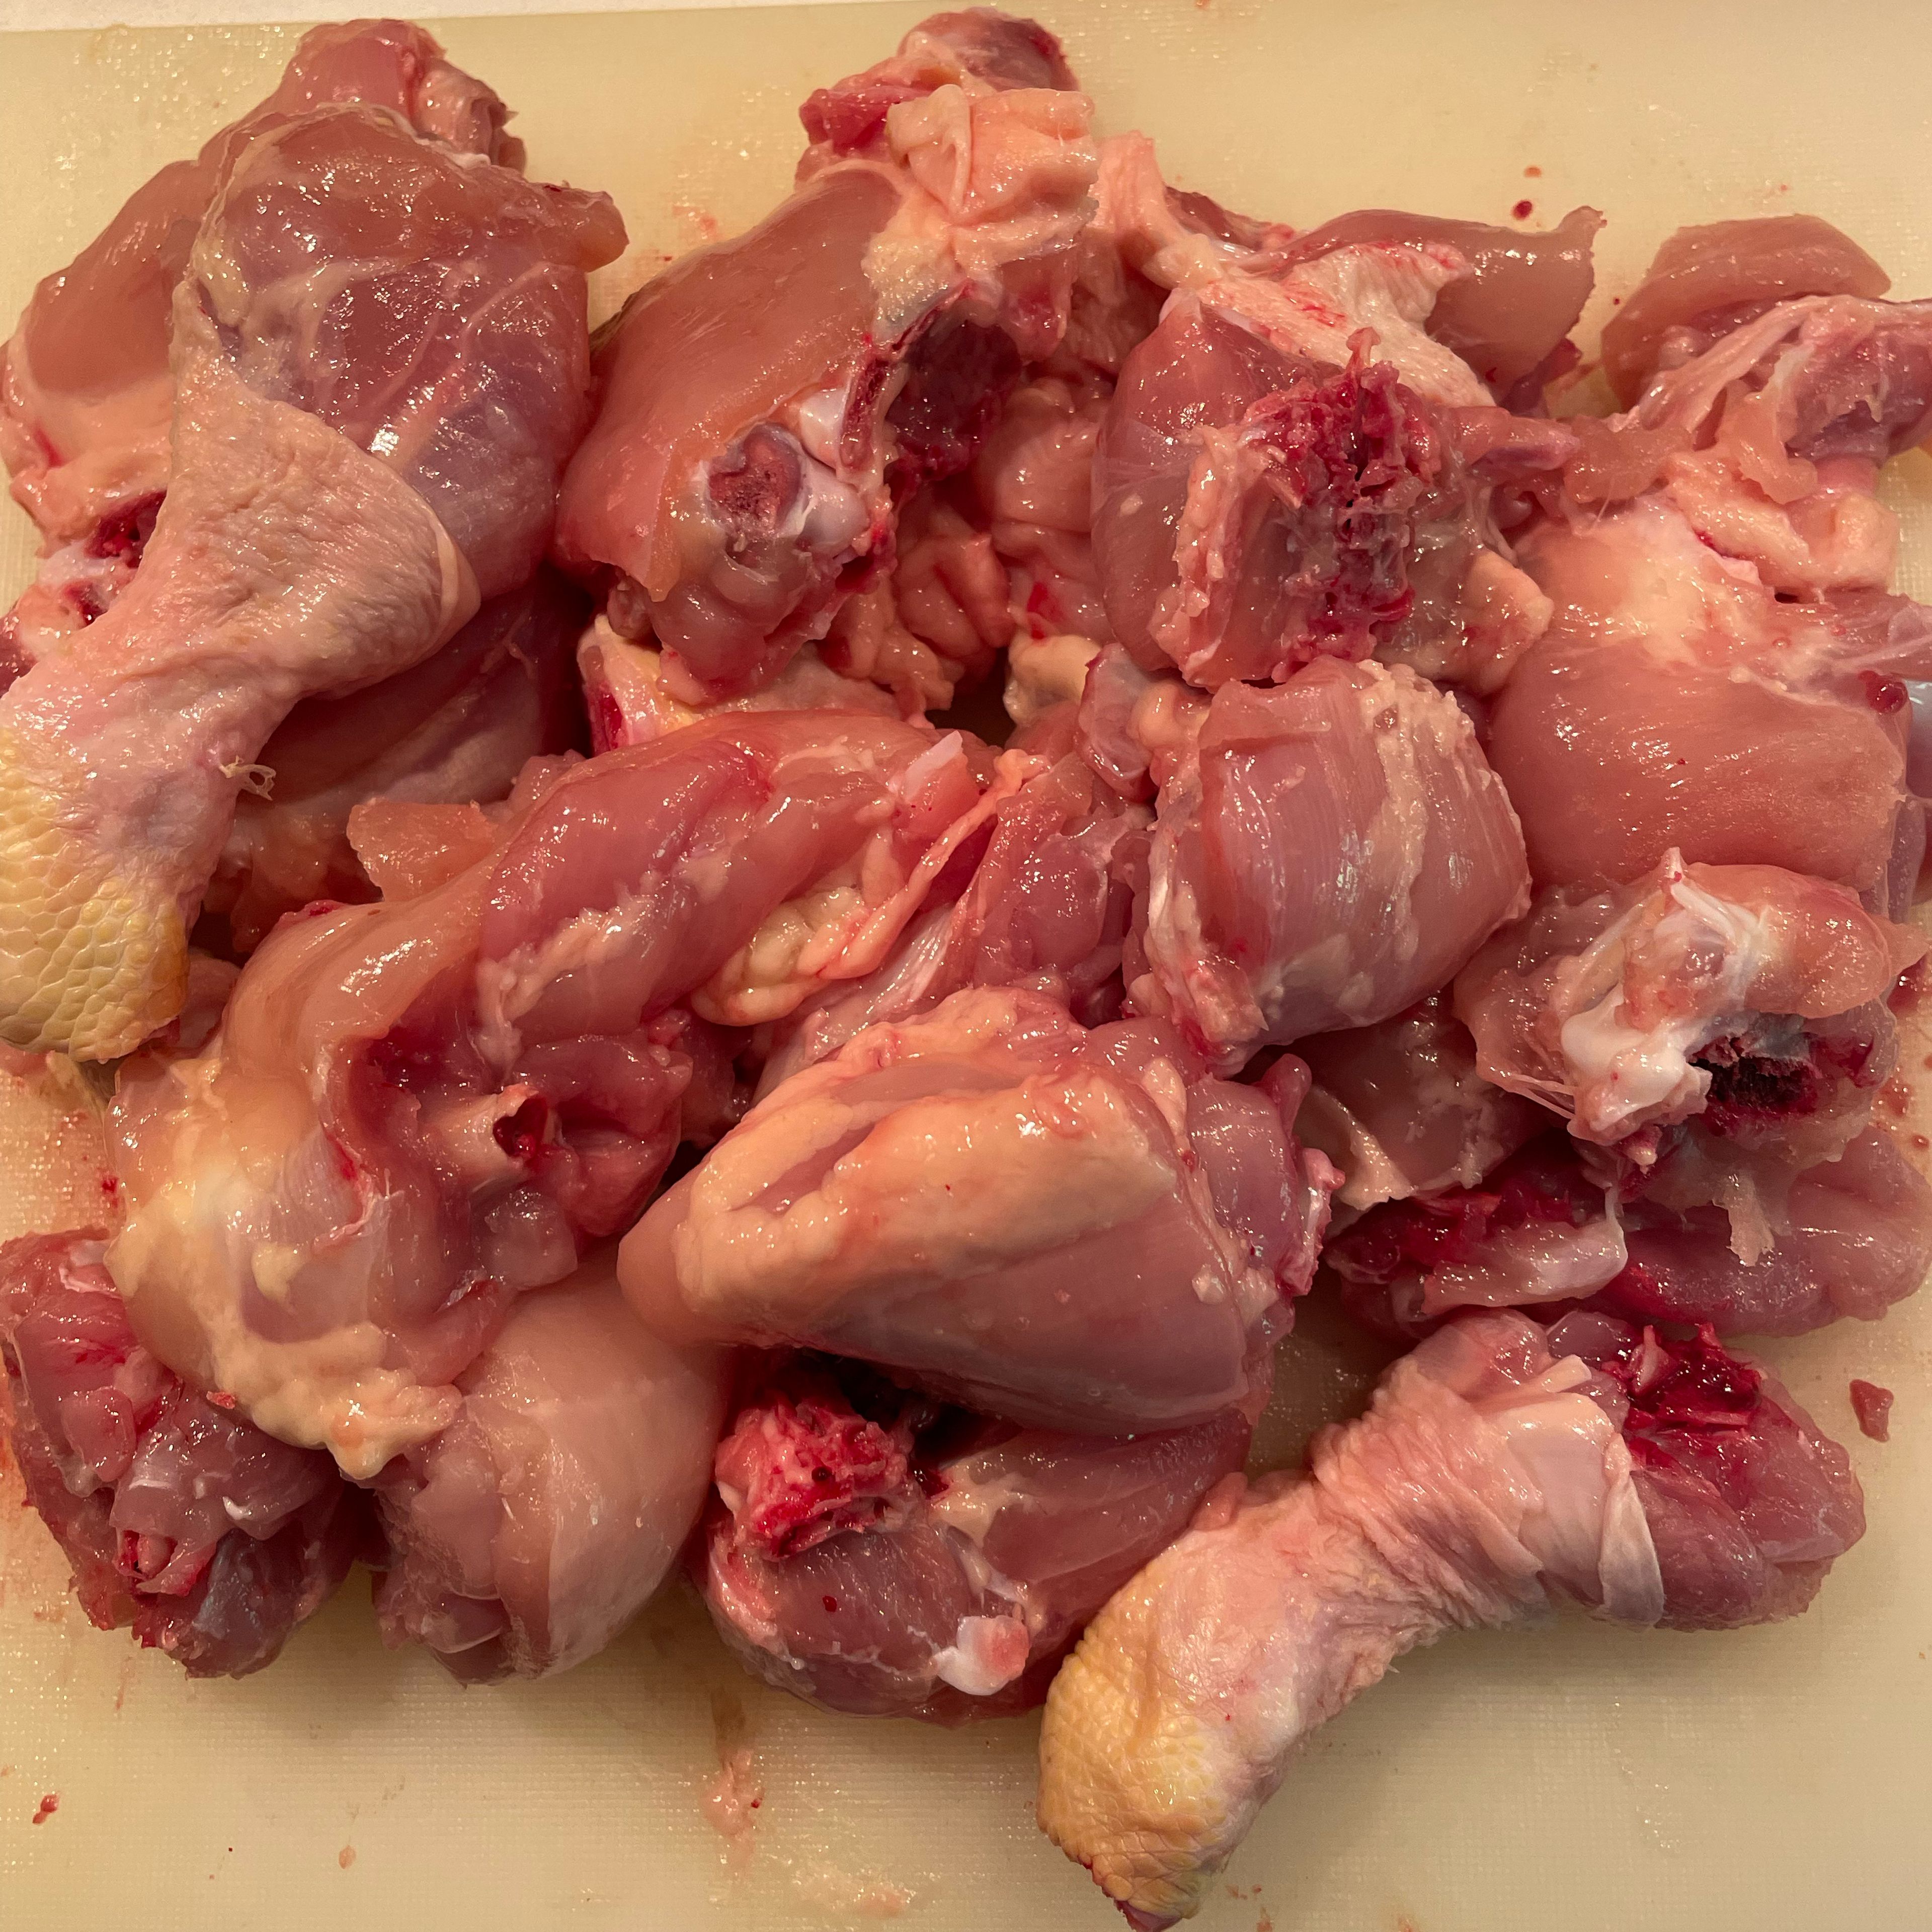 Remove excess skin and cut chicken into pieces, bones in.